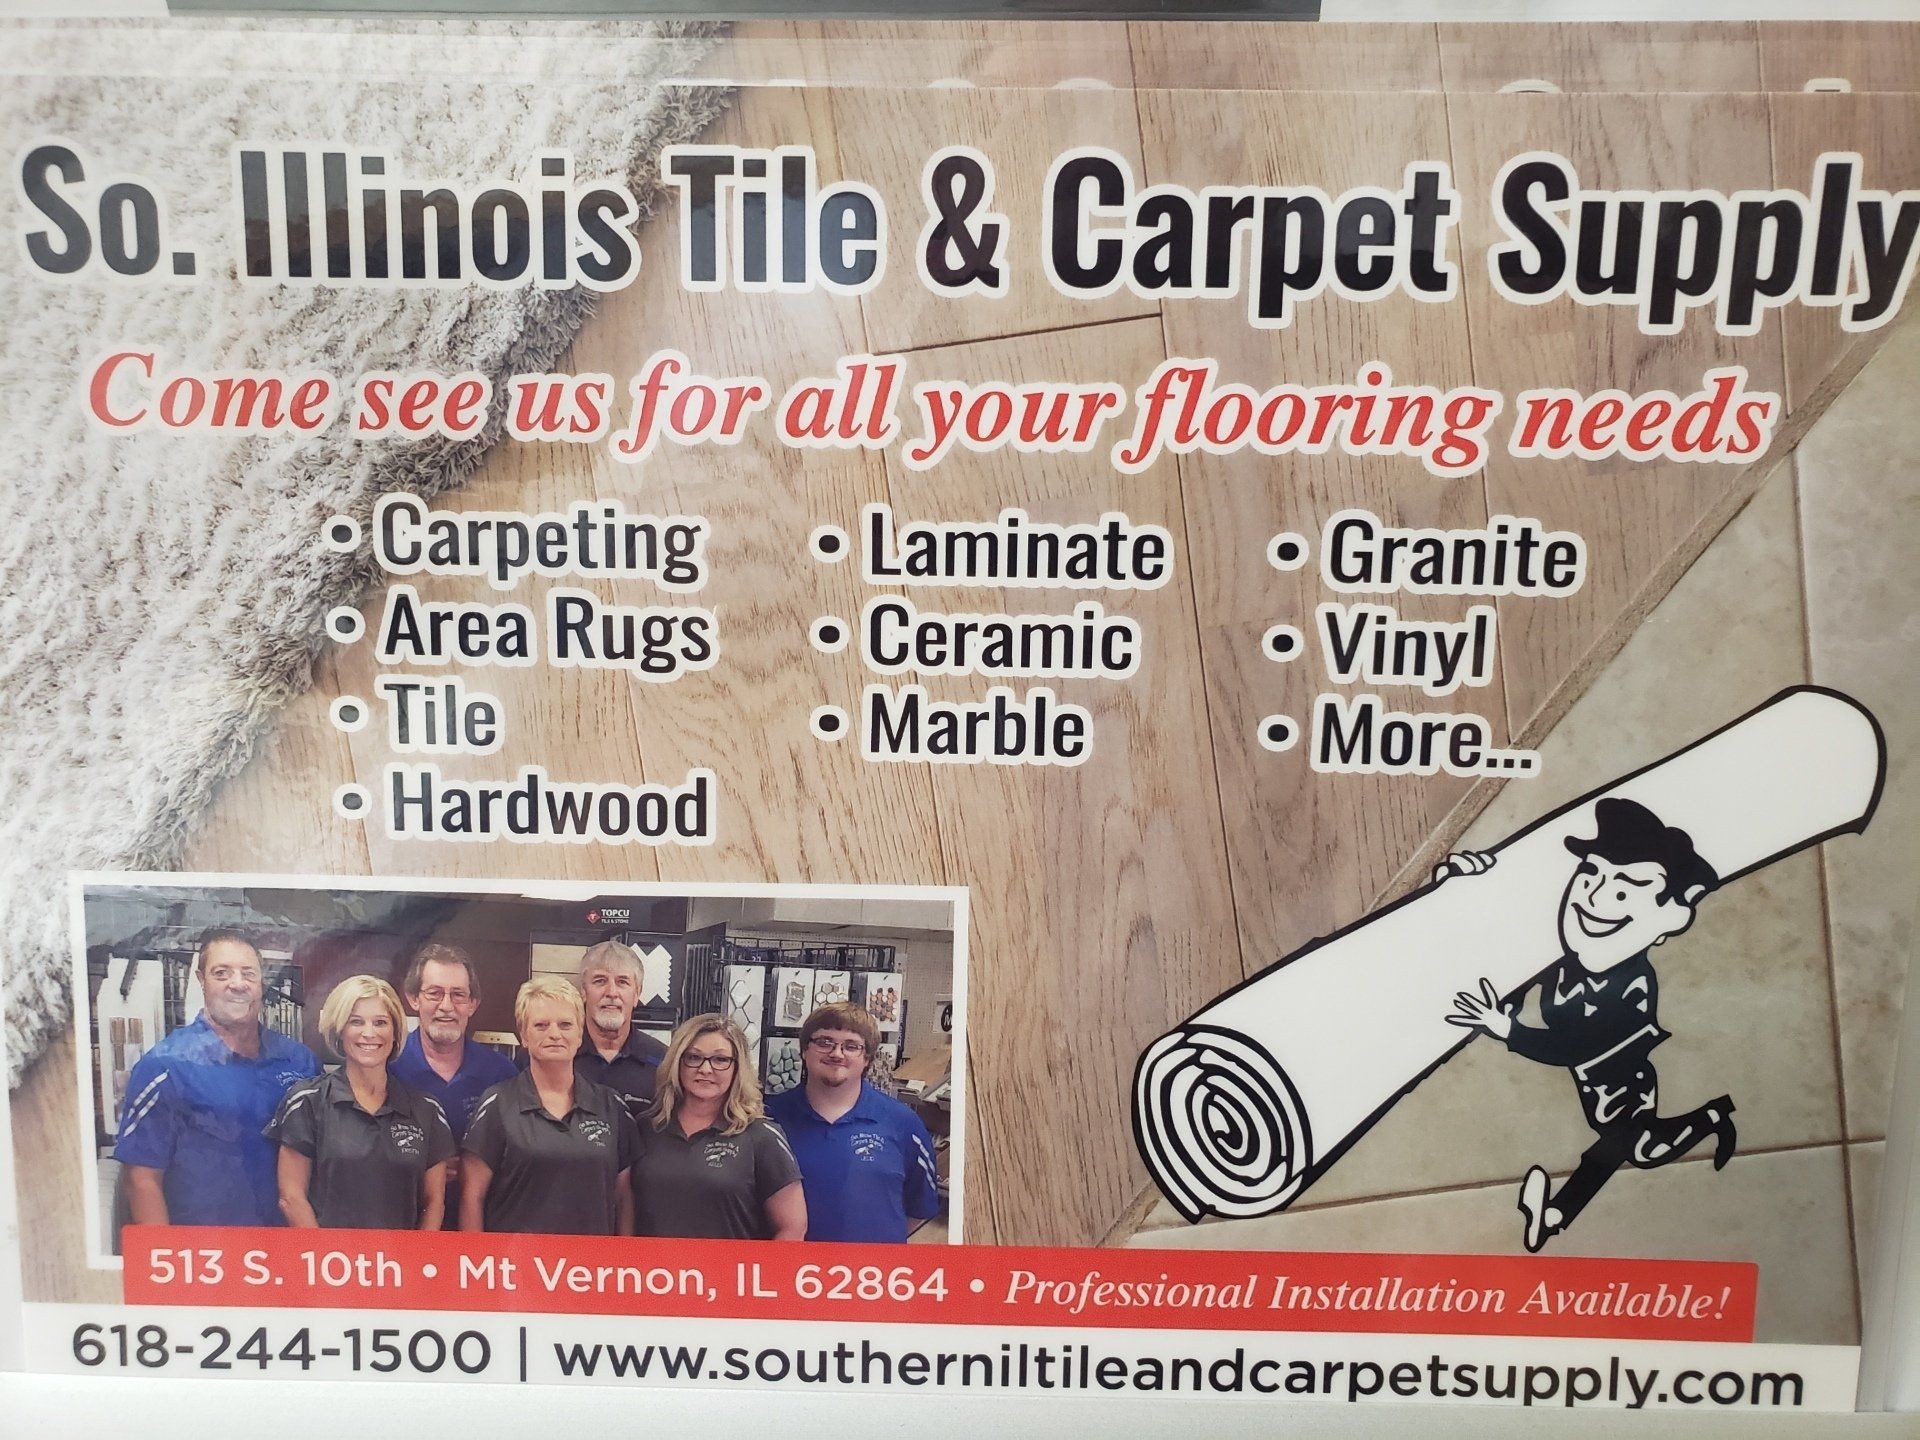 Southern Illinois Tile & Carpet Supply Owners — Mount Vernon, IL — Southern Illinois Tile & Carpet